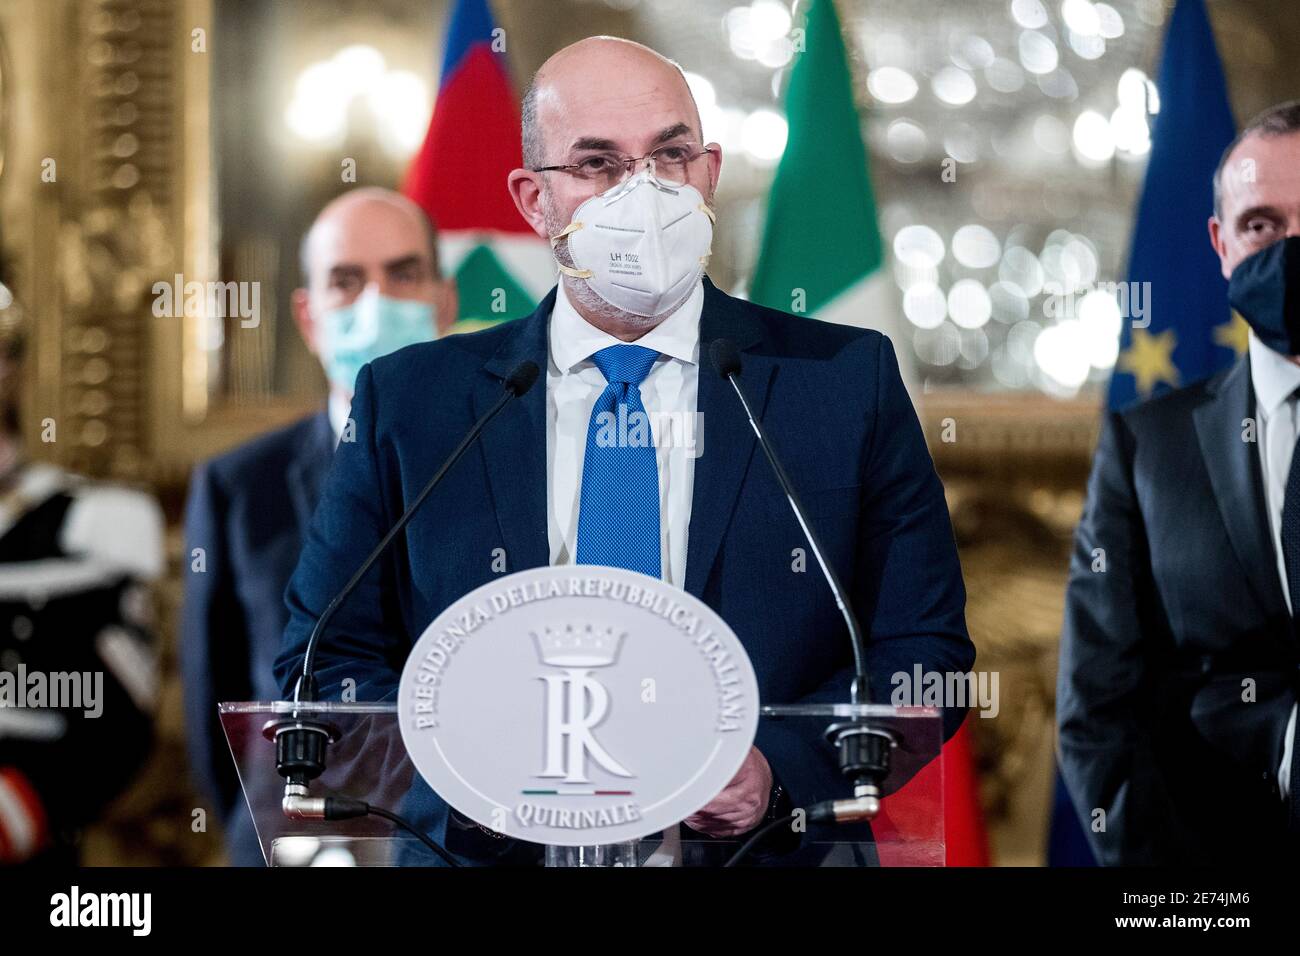 Rome, Italy. 29th Jan 2021. (210129) -- ROME, Jan. 29, 2021 (Xinhua) -- The Five Star Movement's leader Vito Crimi (Front) speaks to the media at the Quirinale Palace in Rome, Italy, on Jan. 29, 2021. Italian President Sergio Mattarella has given House Speaker Roberto Fico an exploratory mandate to verify whether the same governing majority that existed before Prime Minister Giuseppe Conte resigned on Jan. 26 is still workable. (Pool via Xinhua) Credit: Xinhua/Alamy Live News Stock Photo